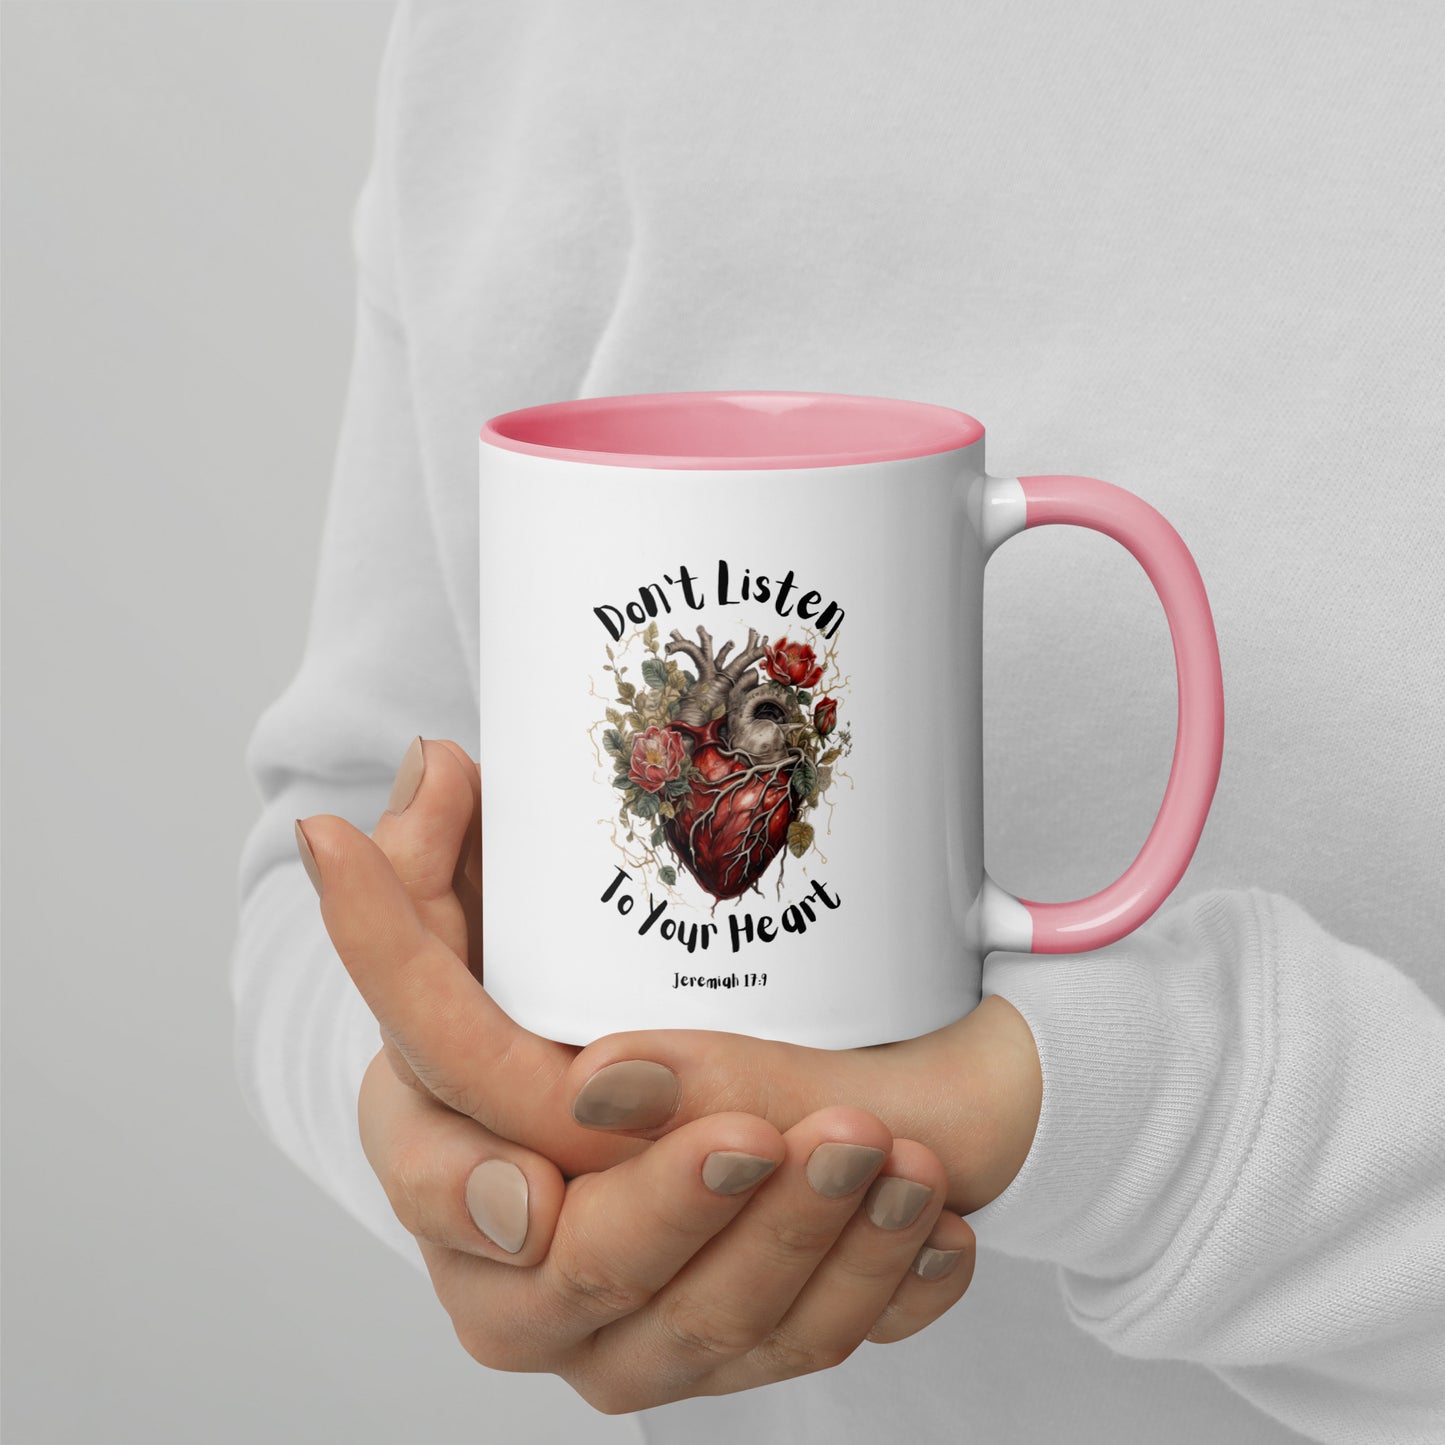 Don't Listen to Your Heart - Mug